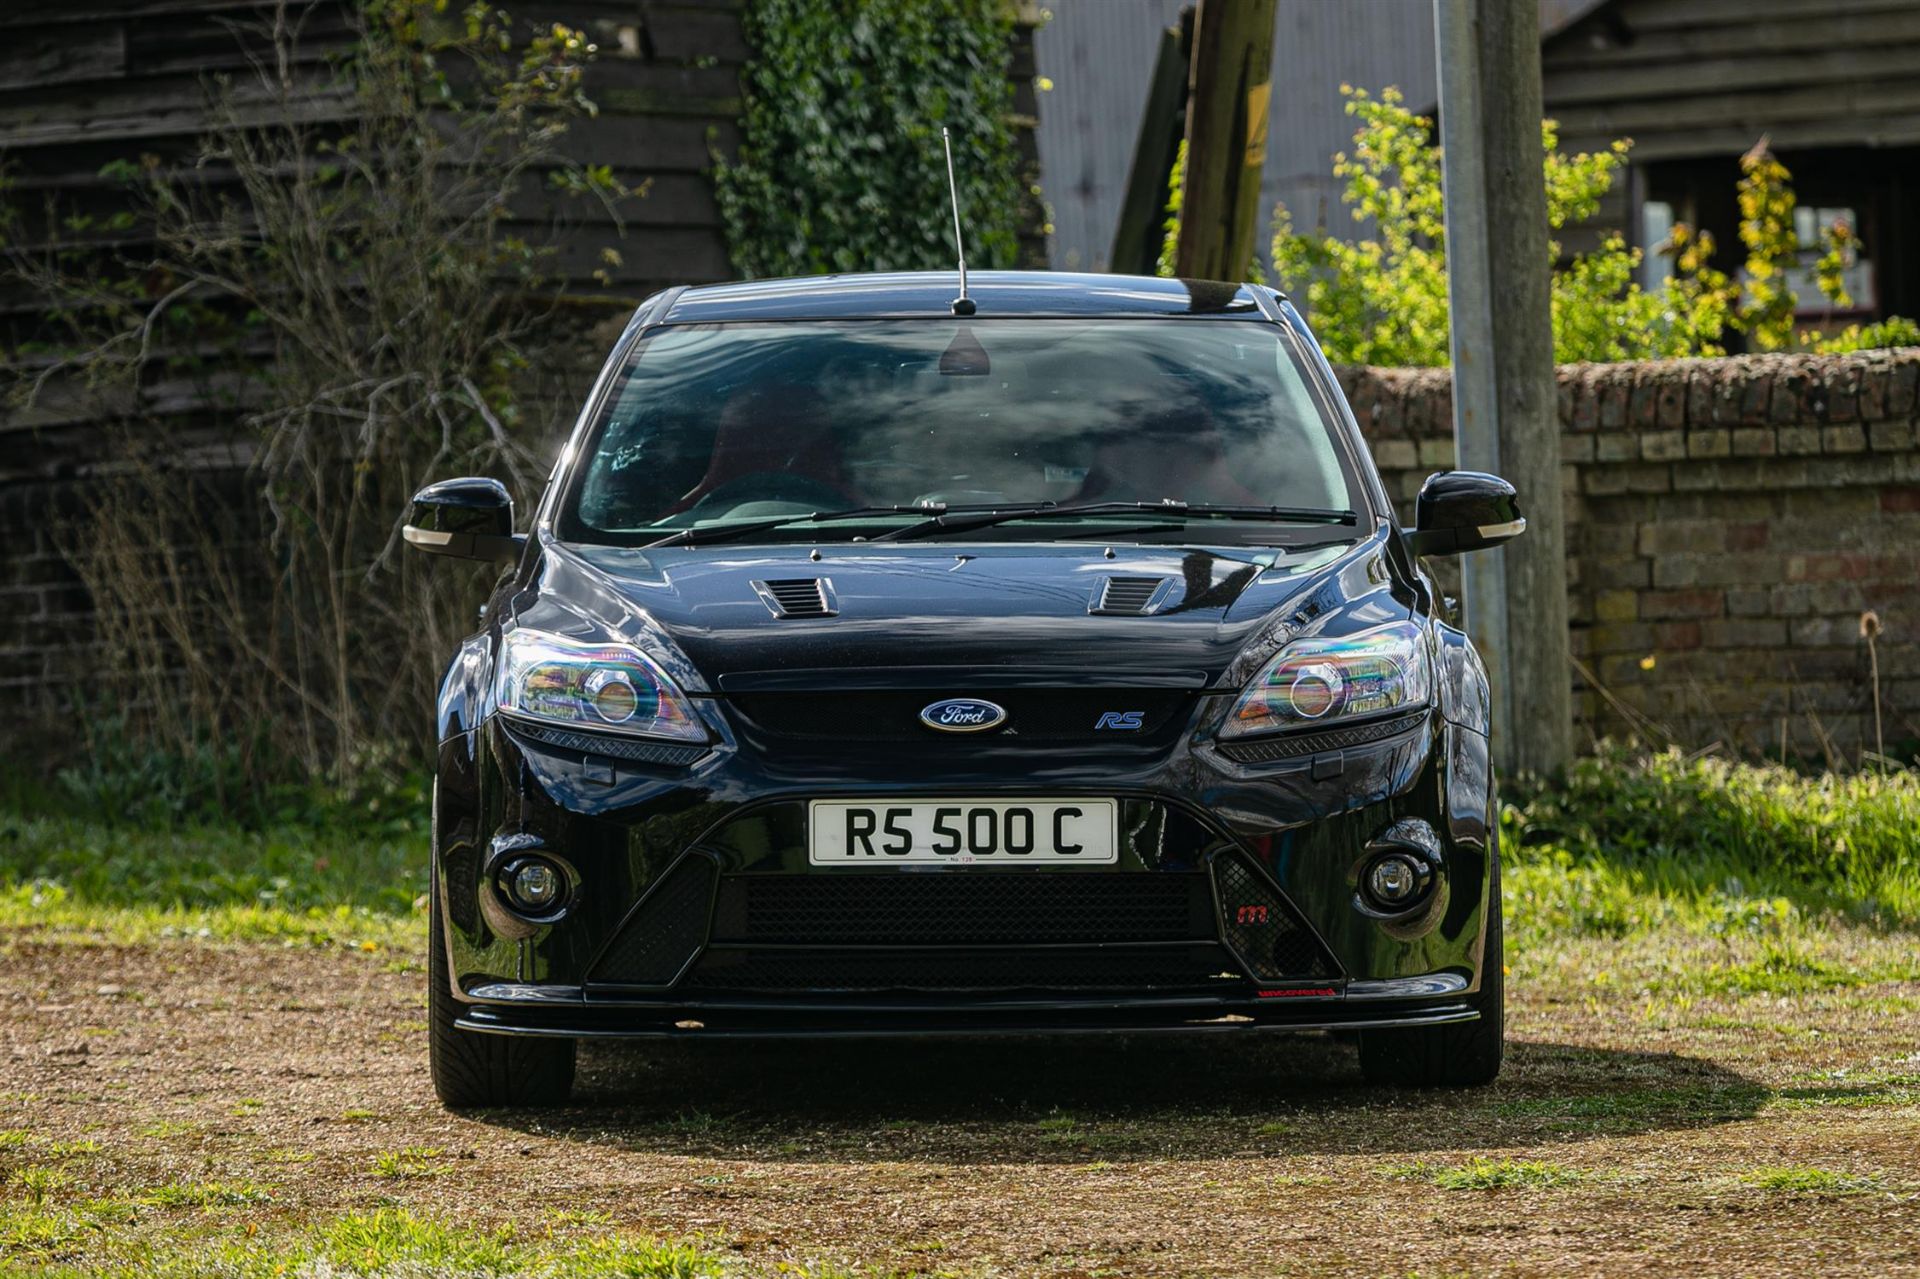 2010 Ford Focus RS500 #128 - 7,700 Miles - Image 6 of 10